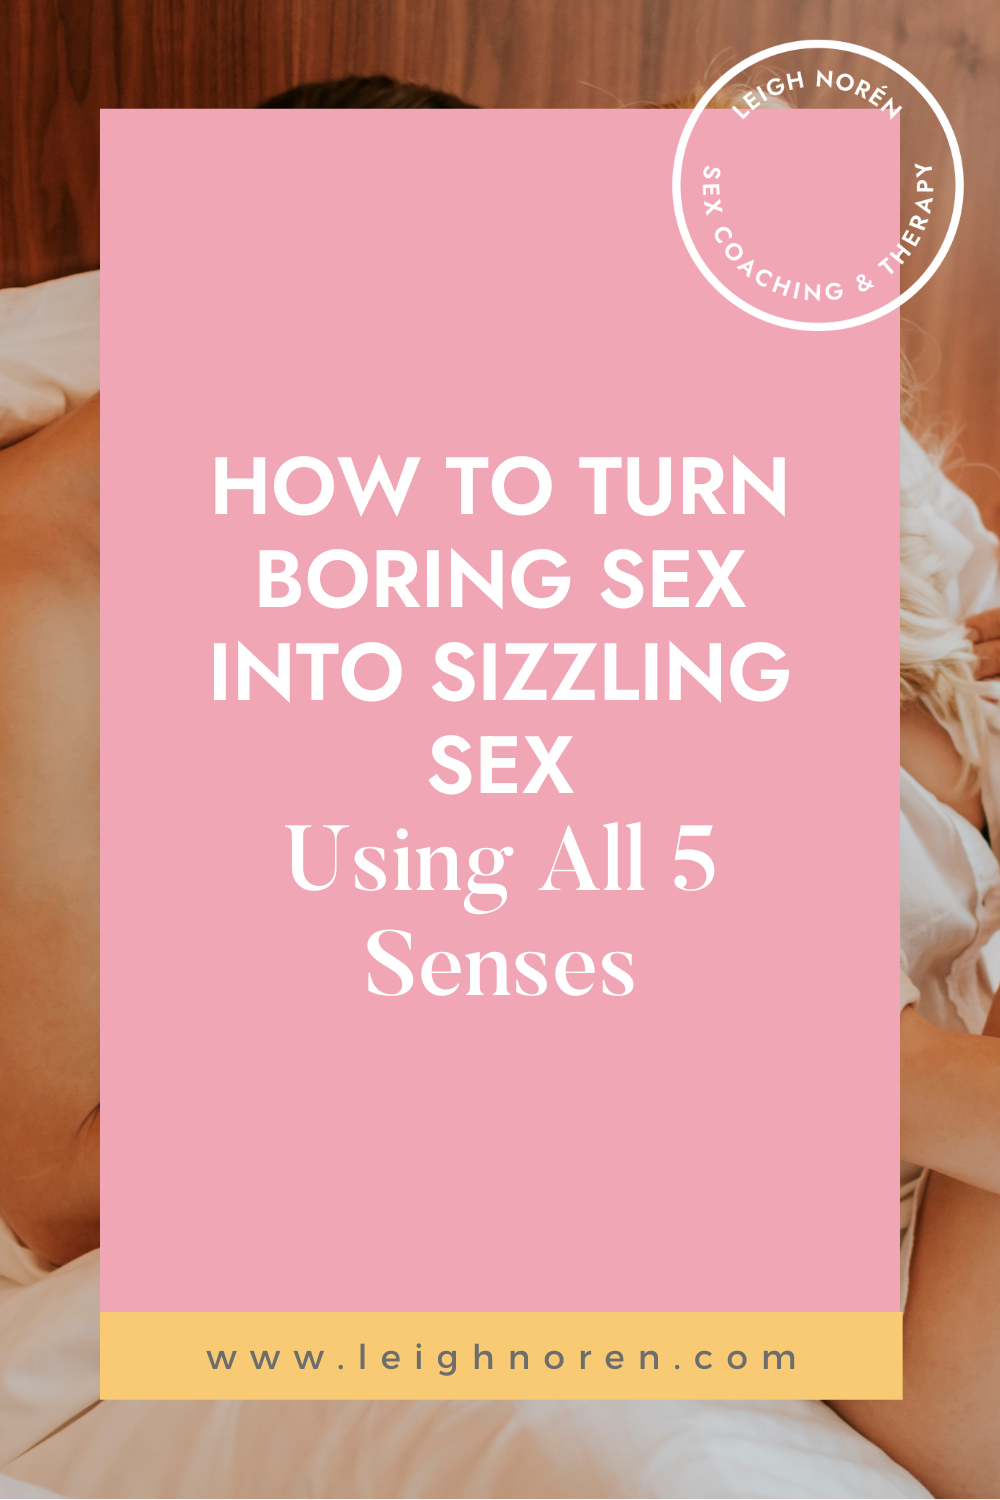 How To Turn Boring Sex Into Sizzling Sex Using All 5 Senses